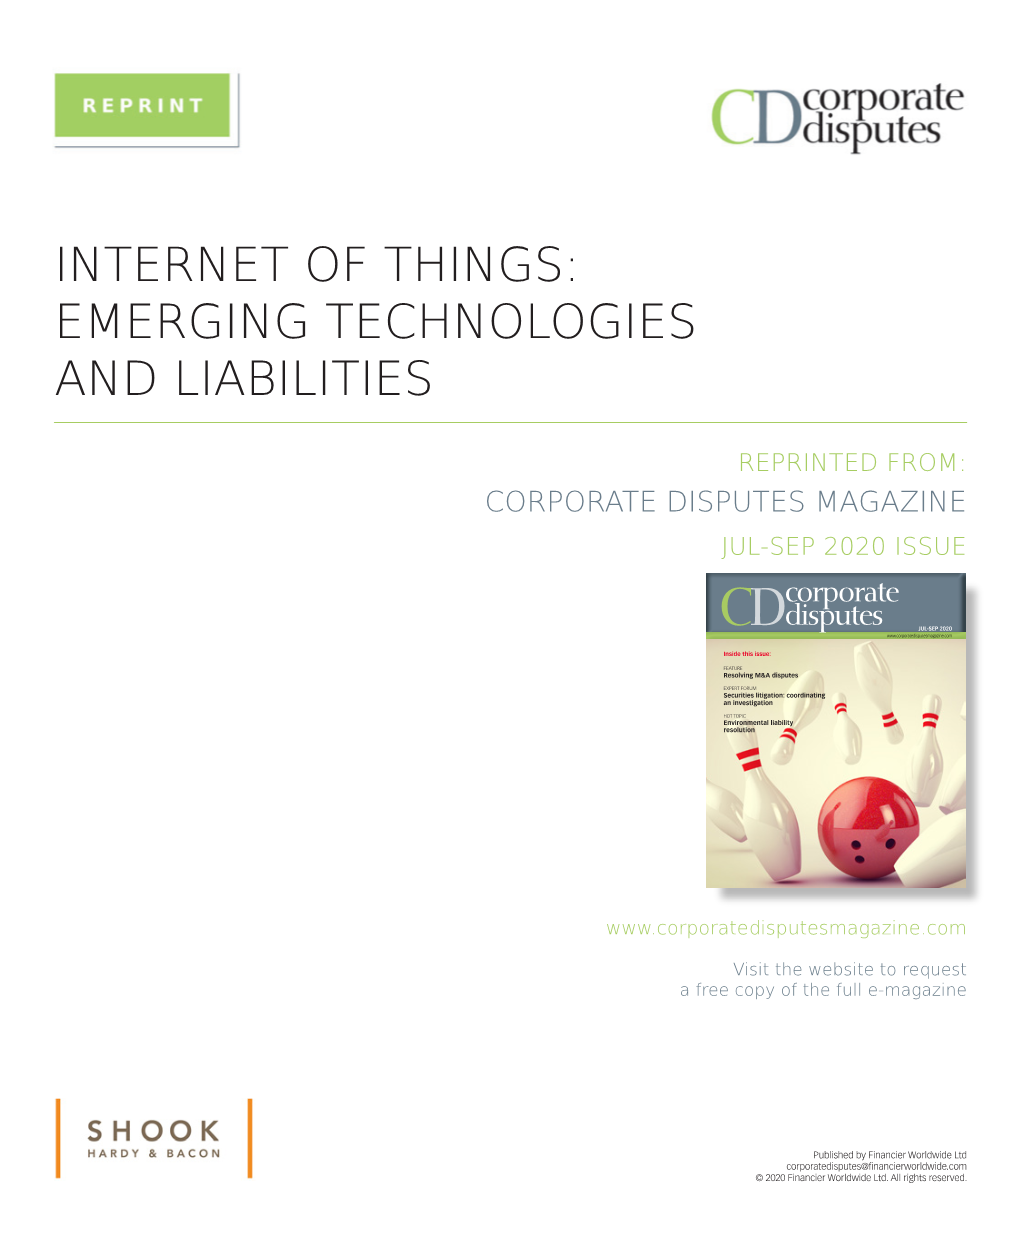 Internet of Things: Emerging Technologies and Liabilities